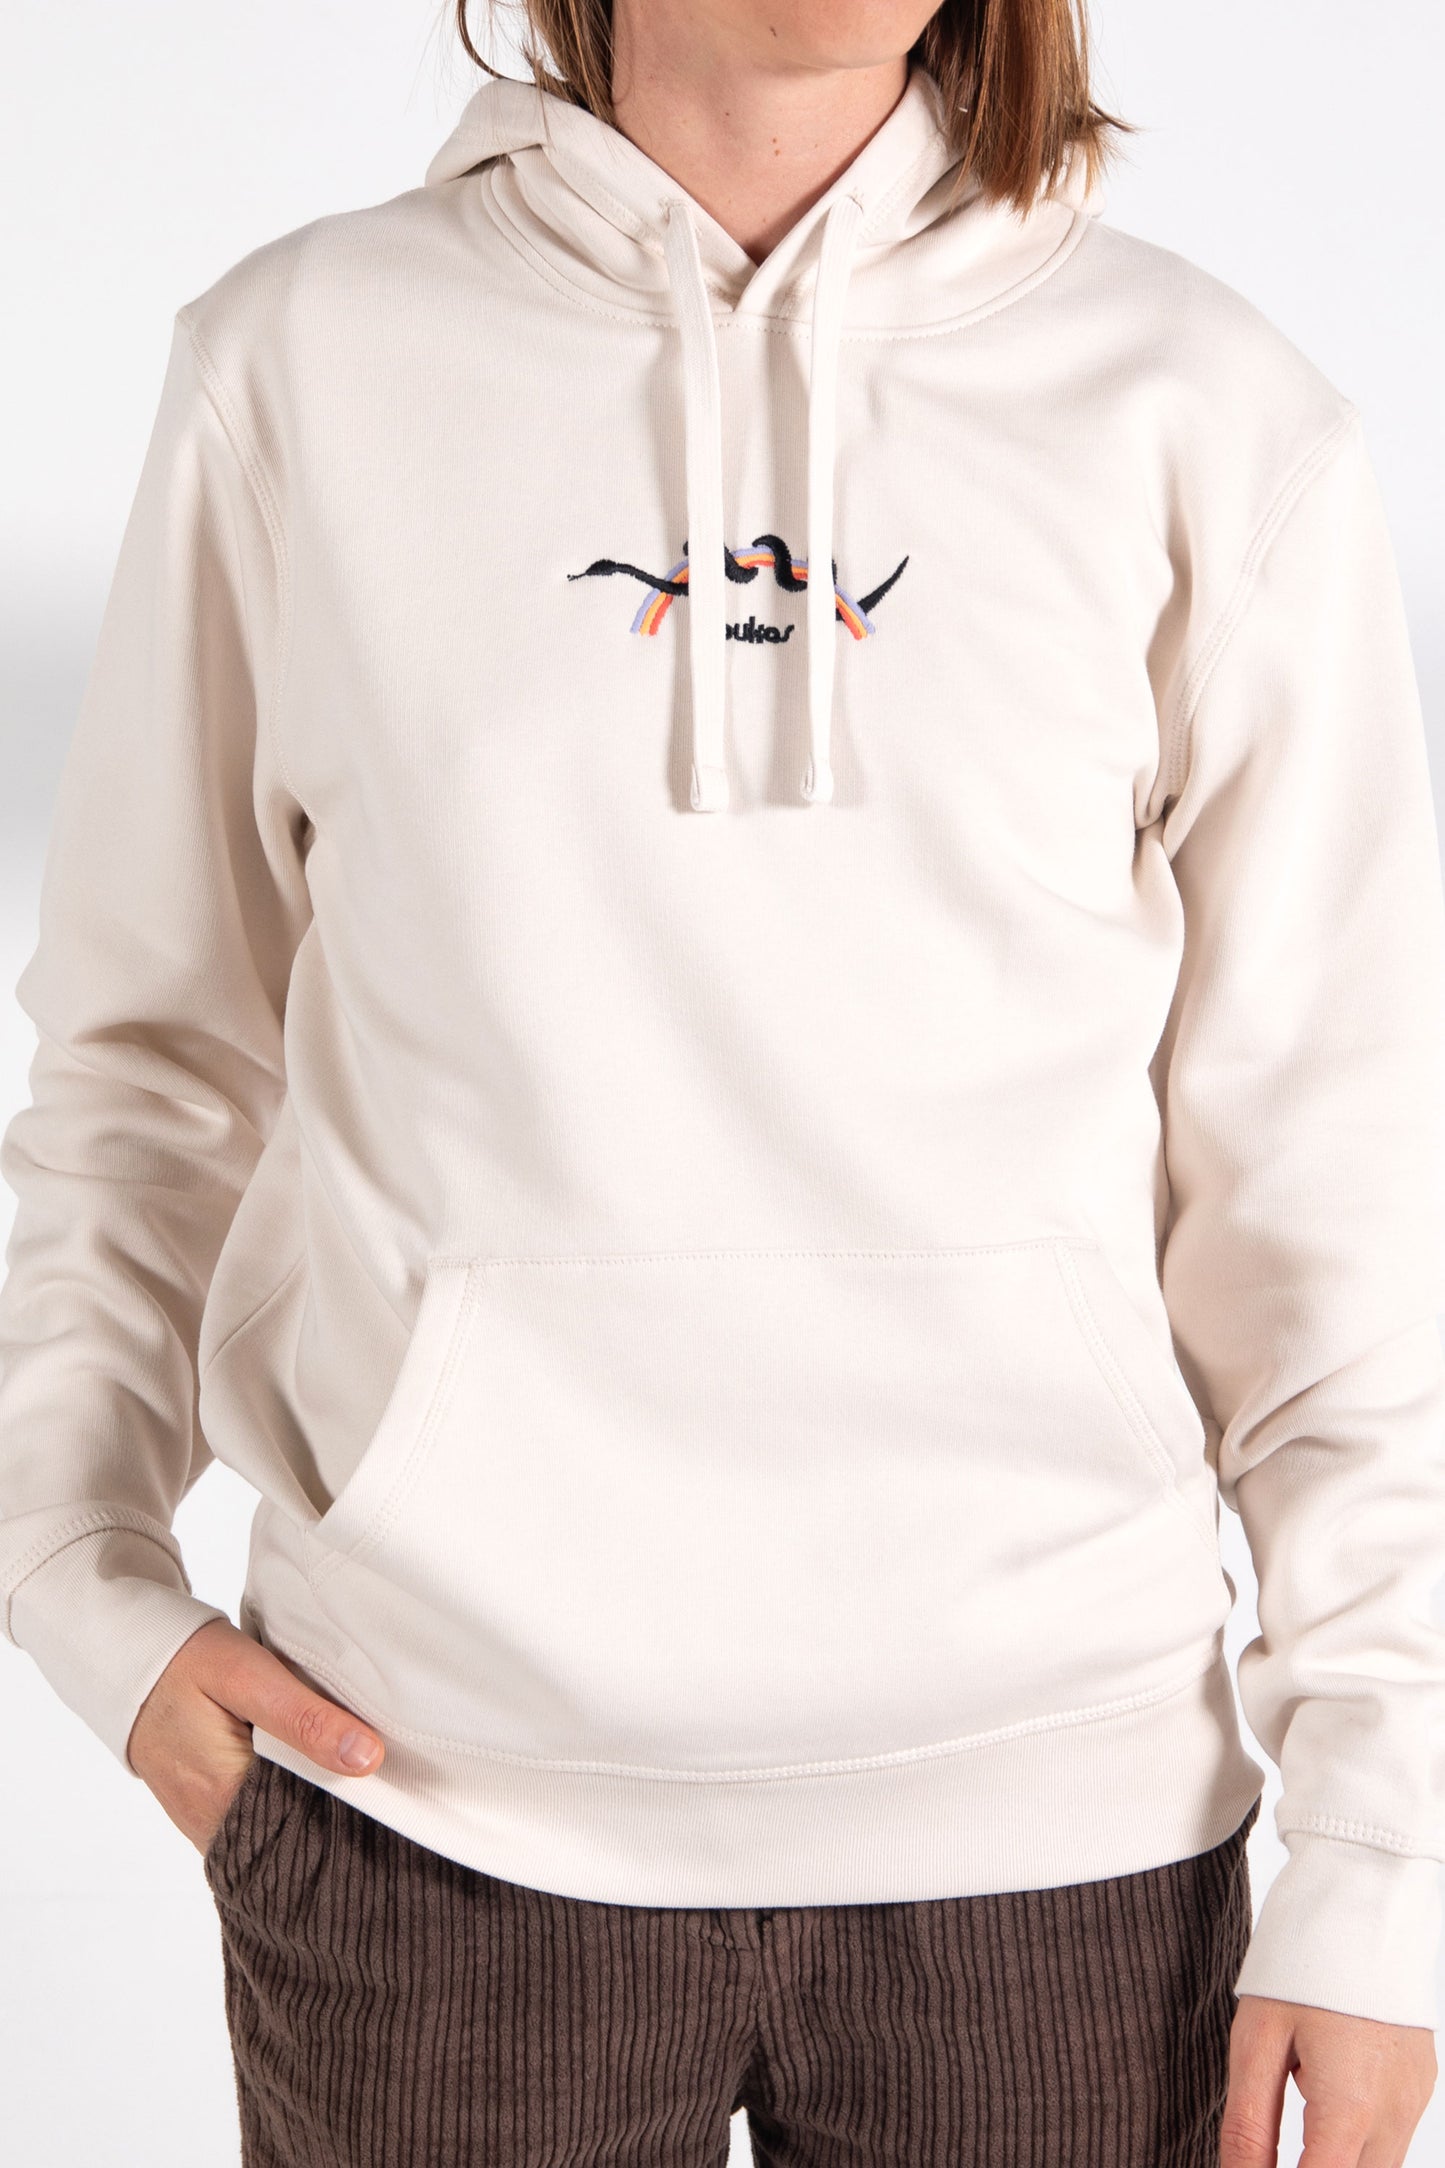 Pukas-Surf-Shop-Surfing-the-basque-country-serpent-woman-hoodie-vinatge-white